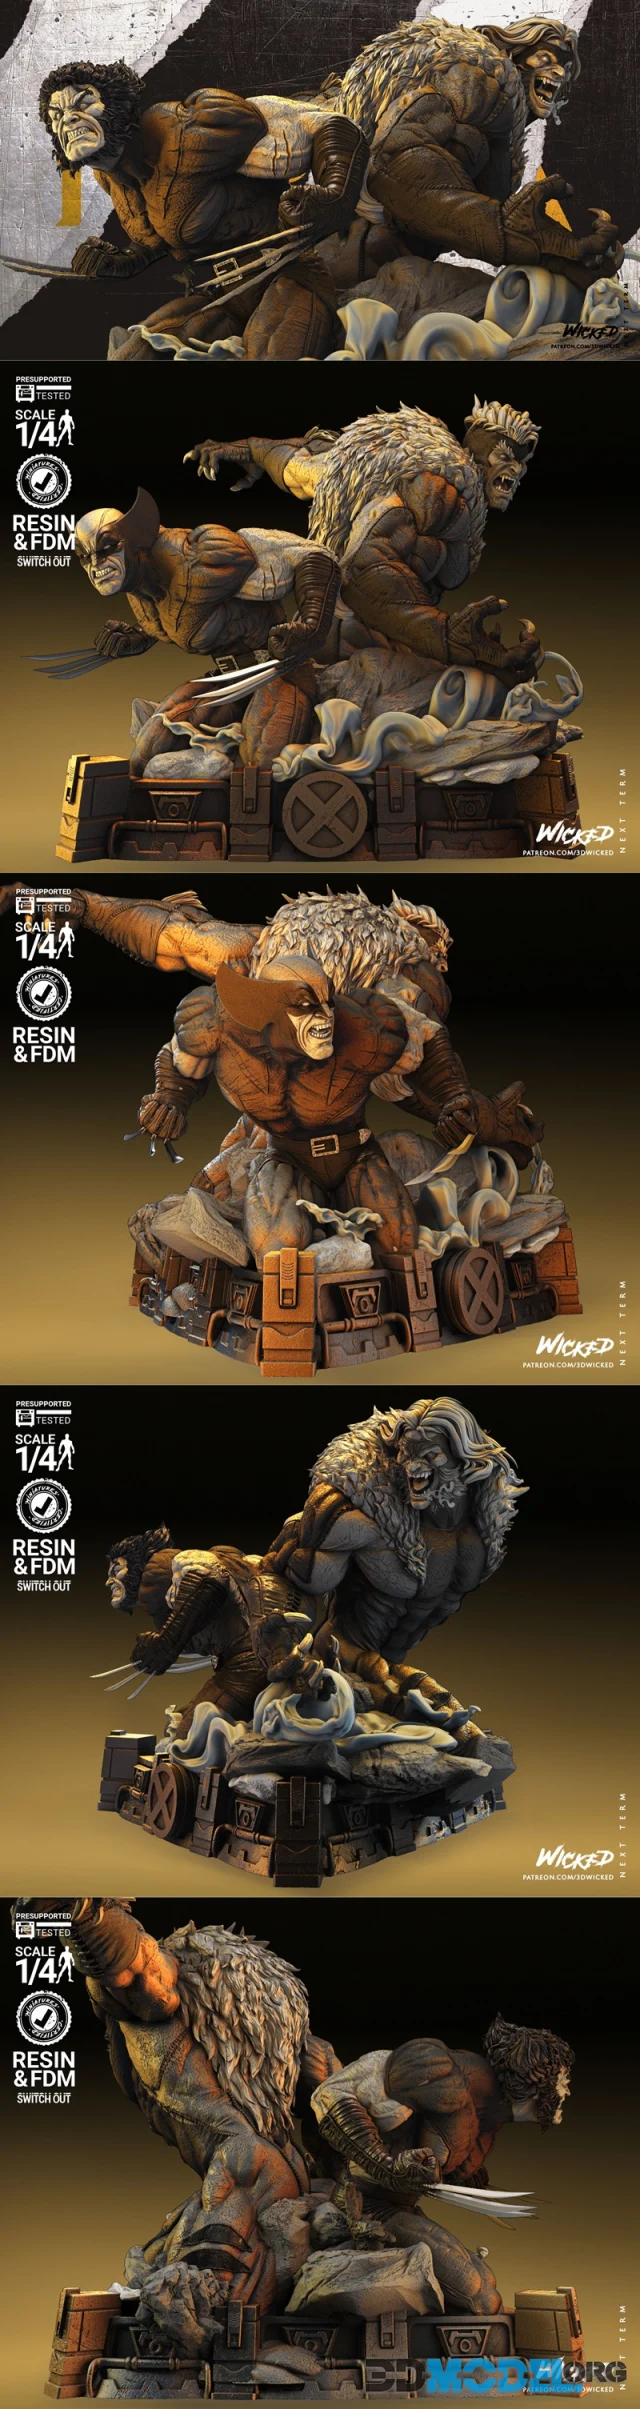 Wicked - Diorama Bust Wolverine and SabreTooth – Printable